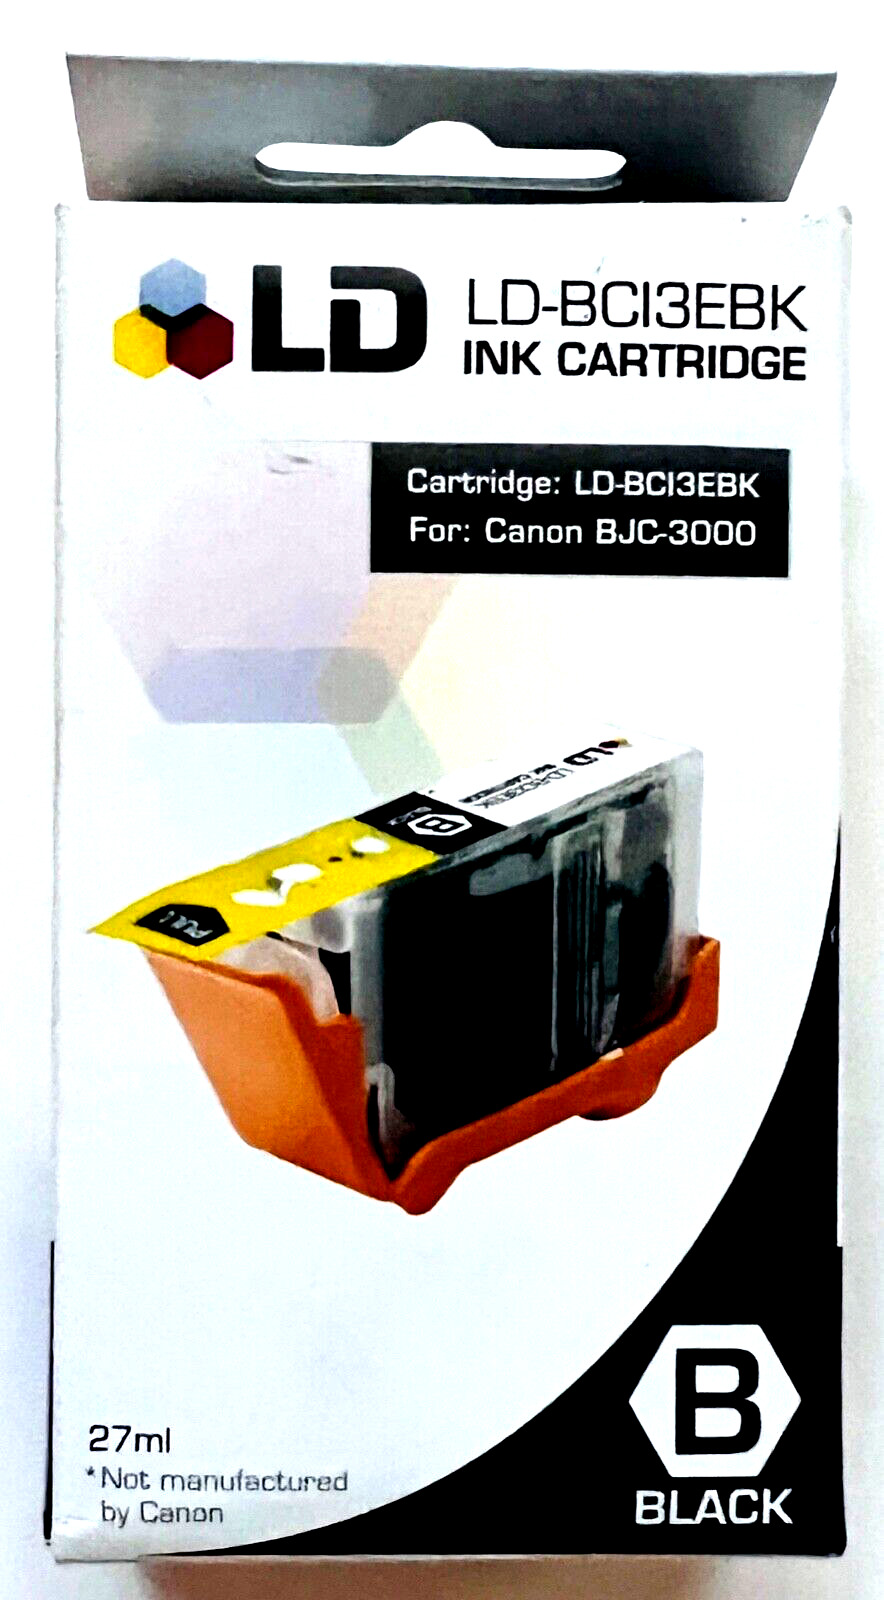 LD-BC13EBK Black Ink Cartridge   **New In Box**  Expired 3/2012 Pictured